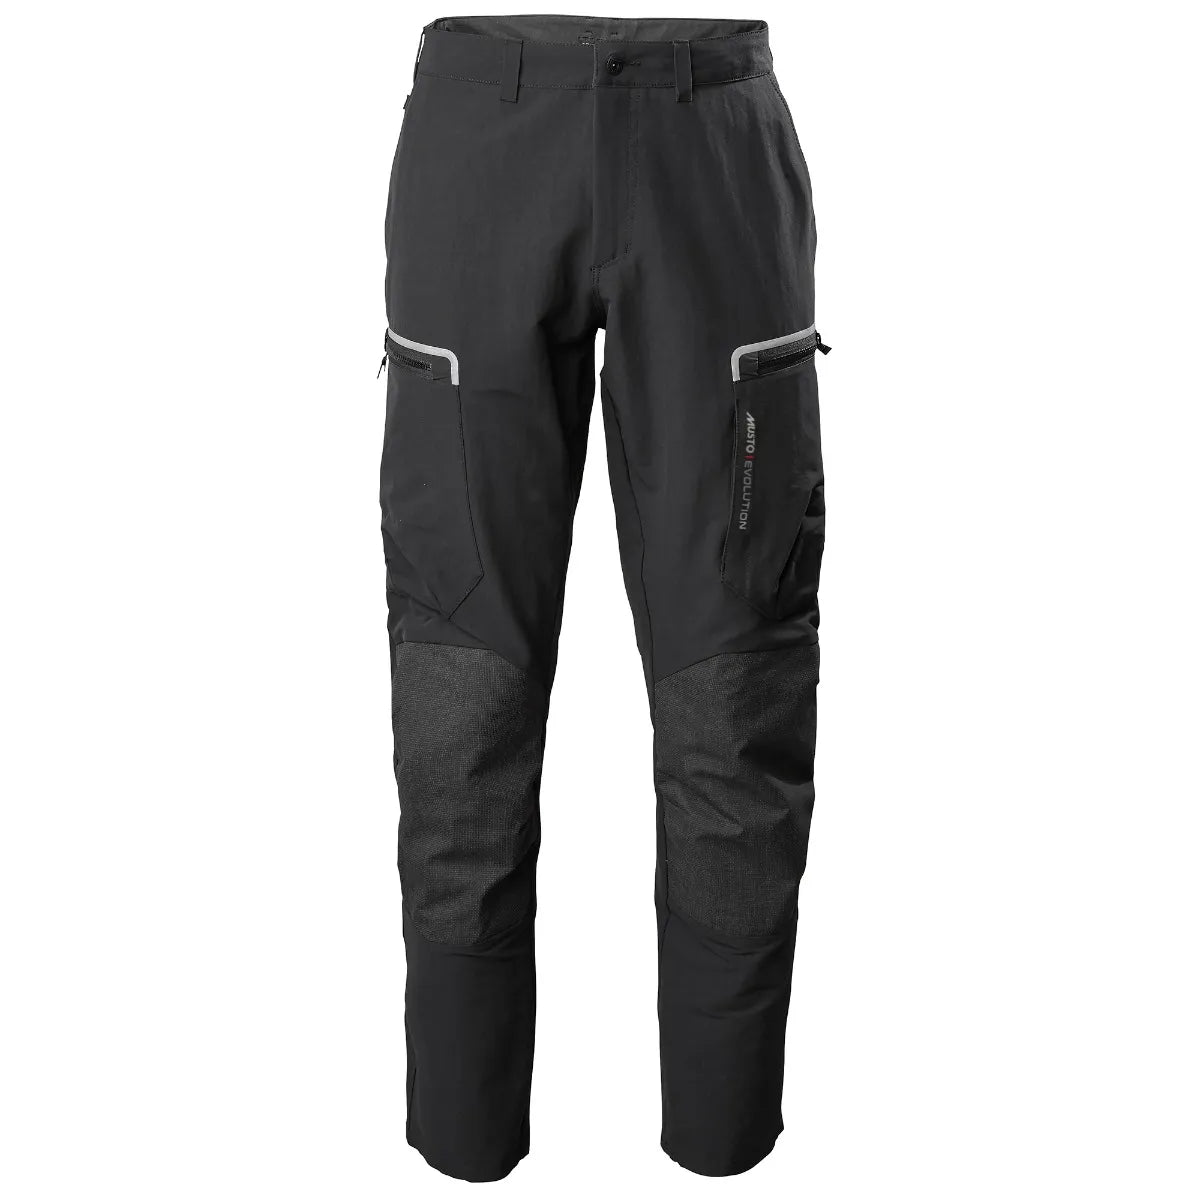 EVOLUTION PERFORMANCE 2.0 TROUSERS